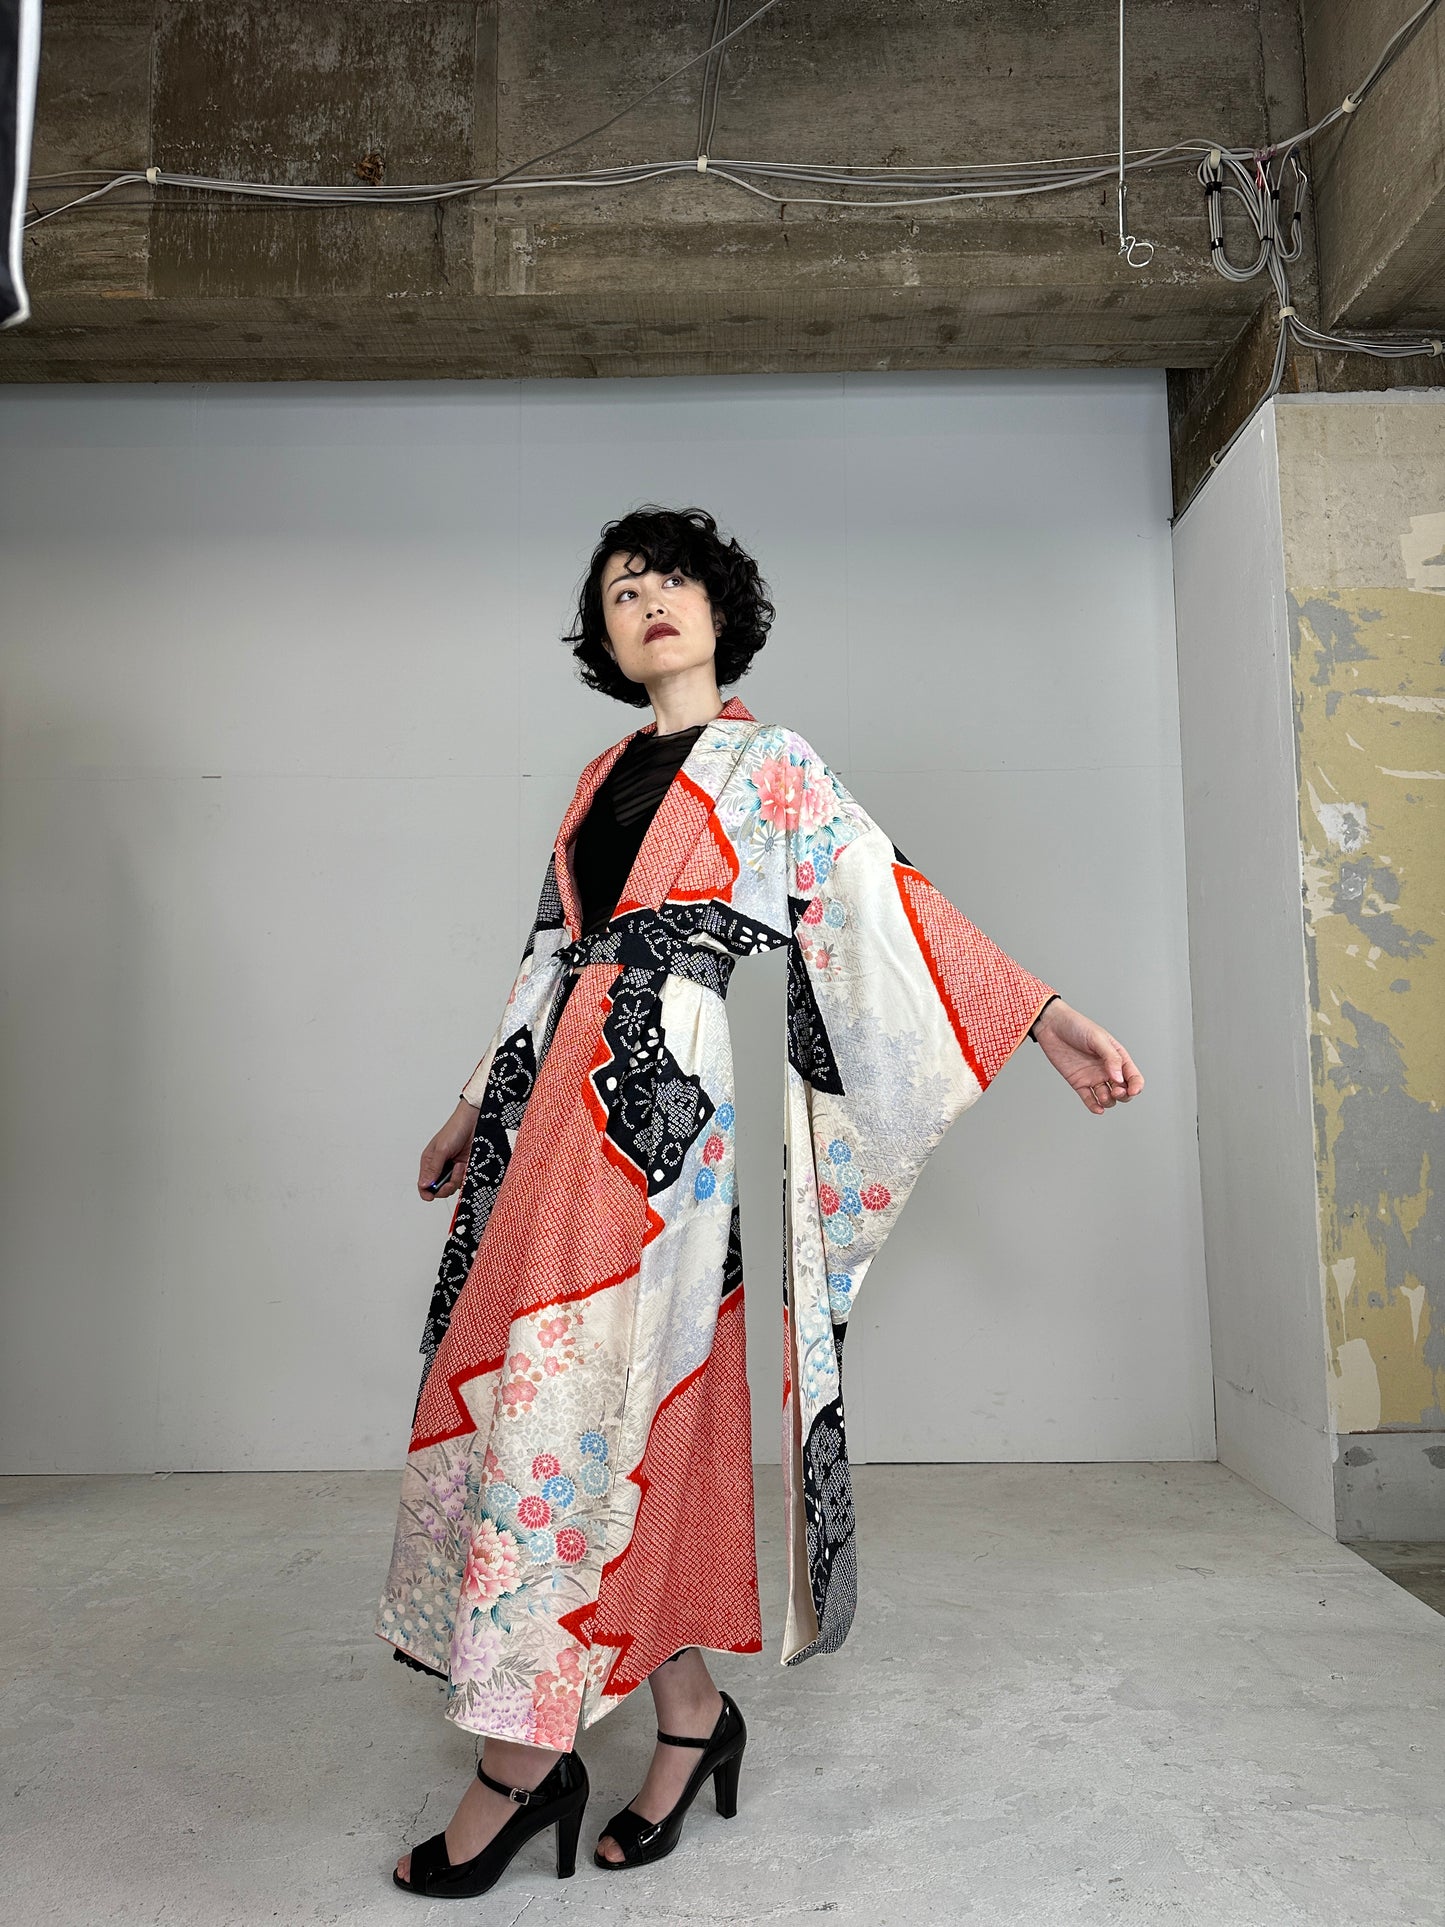 Furisode Kimono dress gown and string belt upcycled from Japanese kimono "furisode mix"